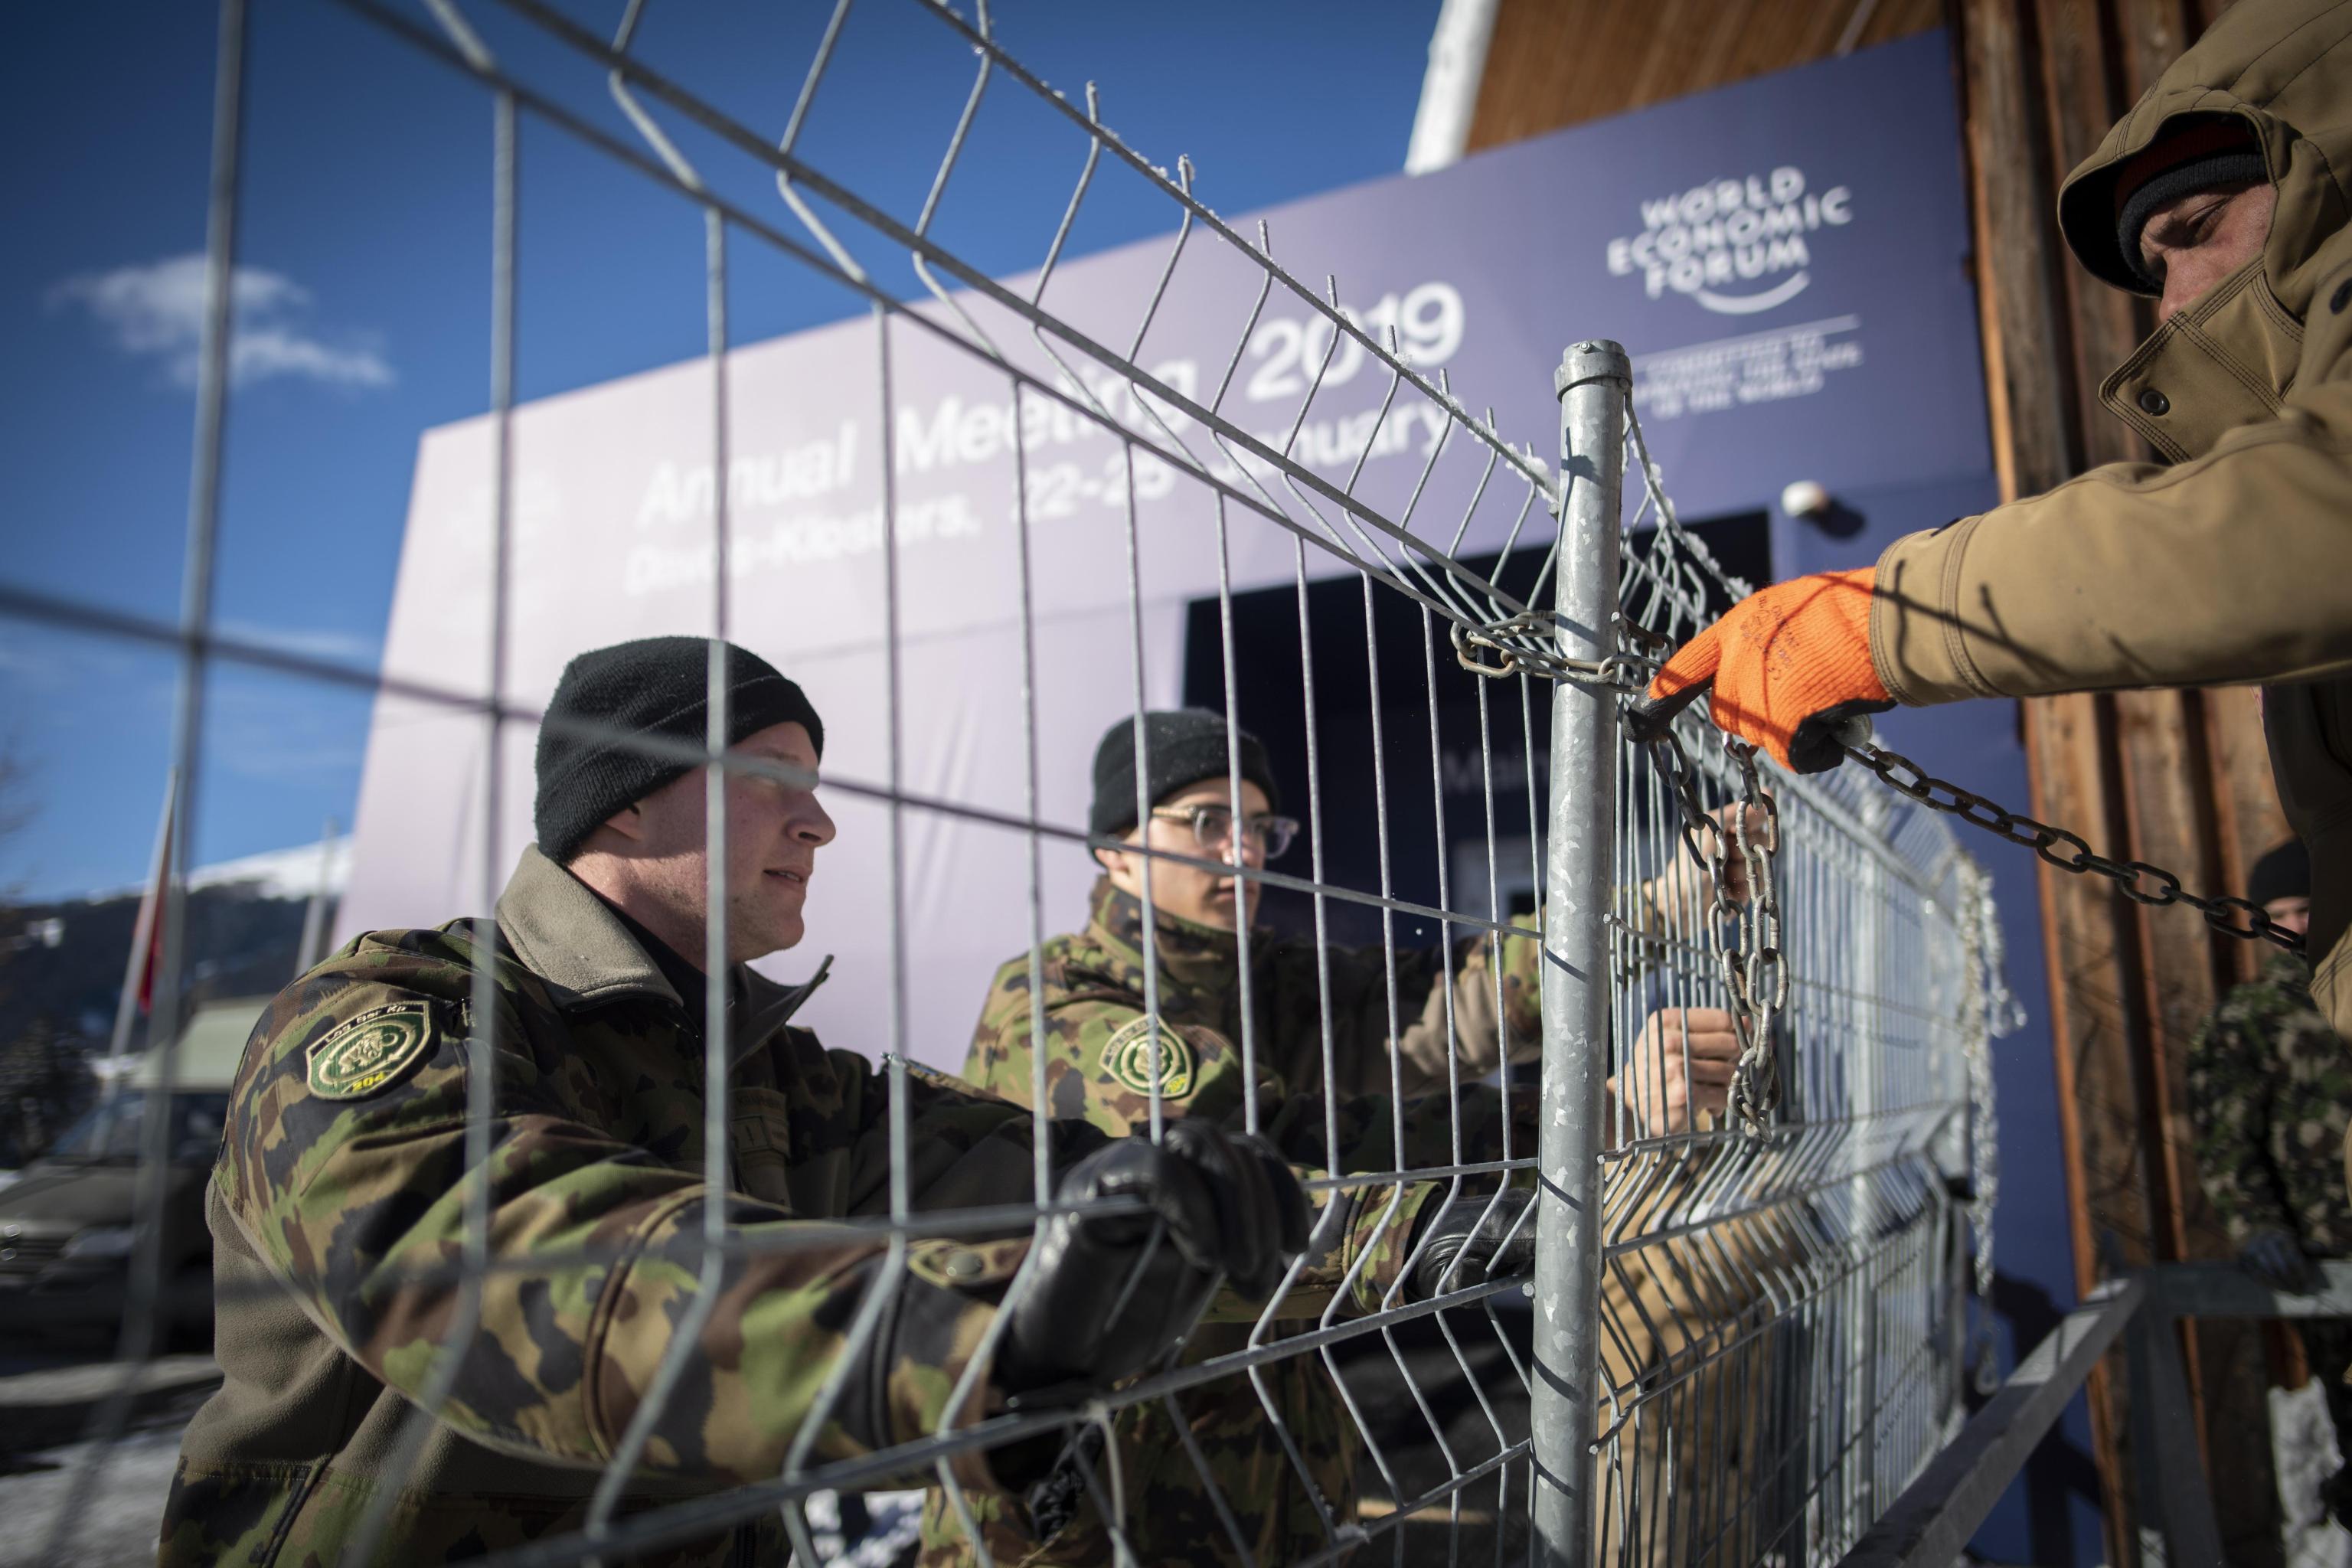 epa07302673 Soldiers set up fences in front of the congress centre, prior the 49th annual meeting of the World Economic Forum WEF 2019 in Davos, Switzerland, 20 January 2019. The meeting brings together enterpreneurs, scientists, chief executive and political leaders in Davos from 22 to 25 January.  EPA/GIAN EHRENZELLER